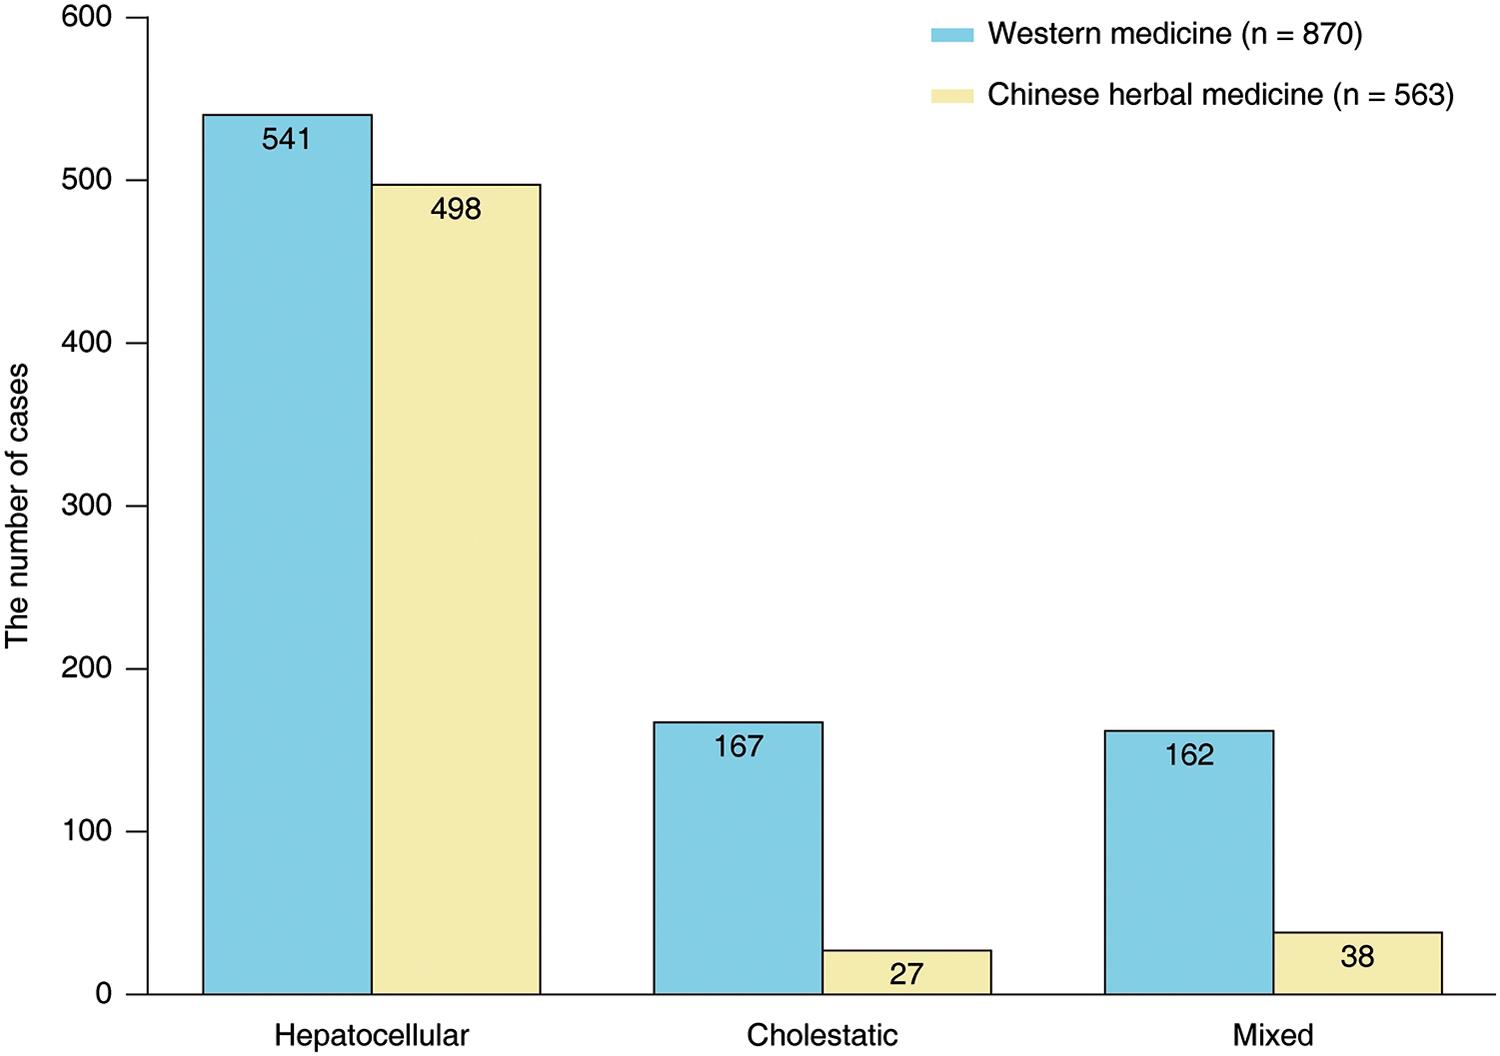 Classification of liver injury caused by Western medicine compared to Chinese herbal medicine,